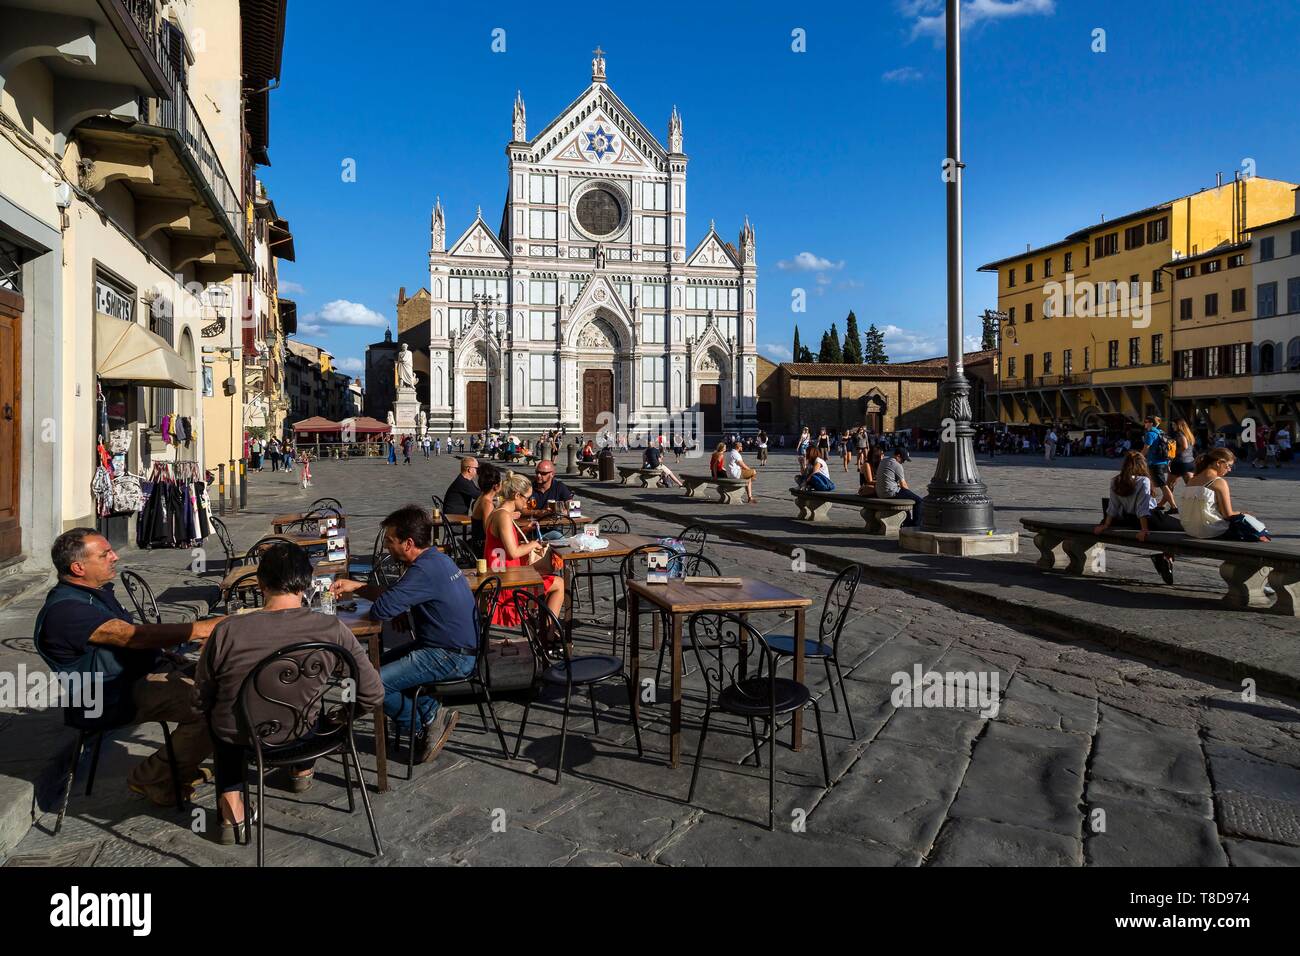 Italy, Tuscany, Florence, historic centre listed as World Heritage by UNESCO, piazza Santa Croce, Santa Croce church Stock Photo